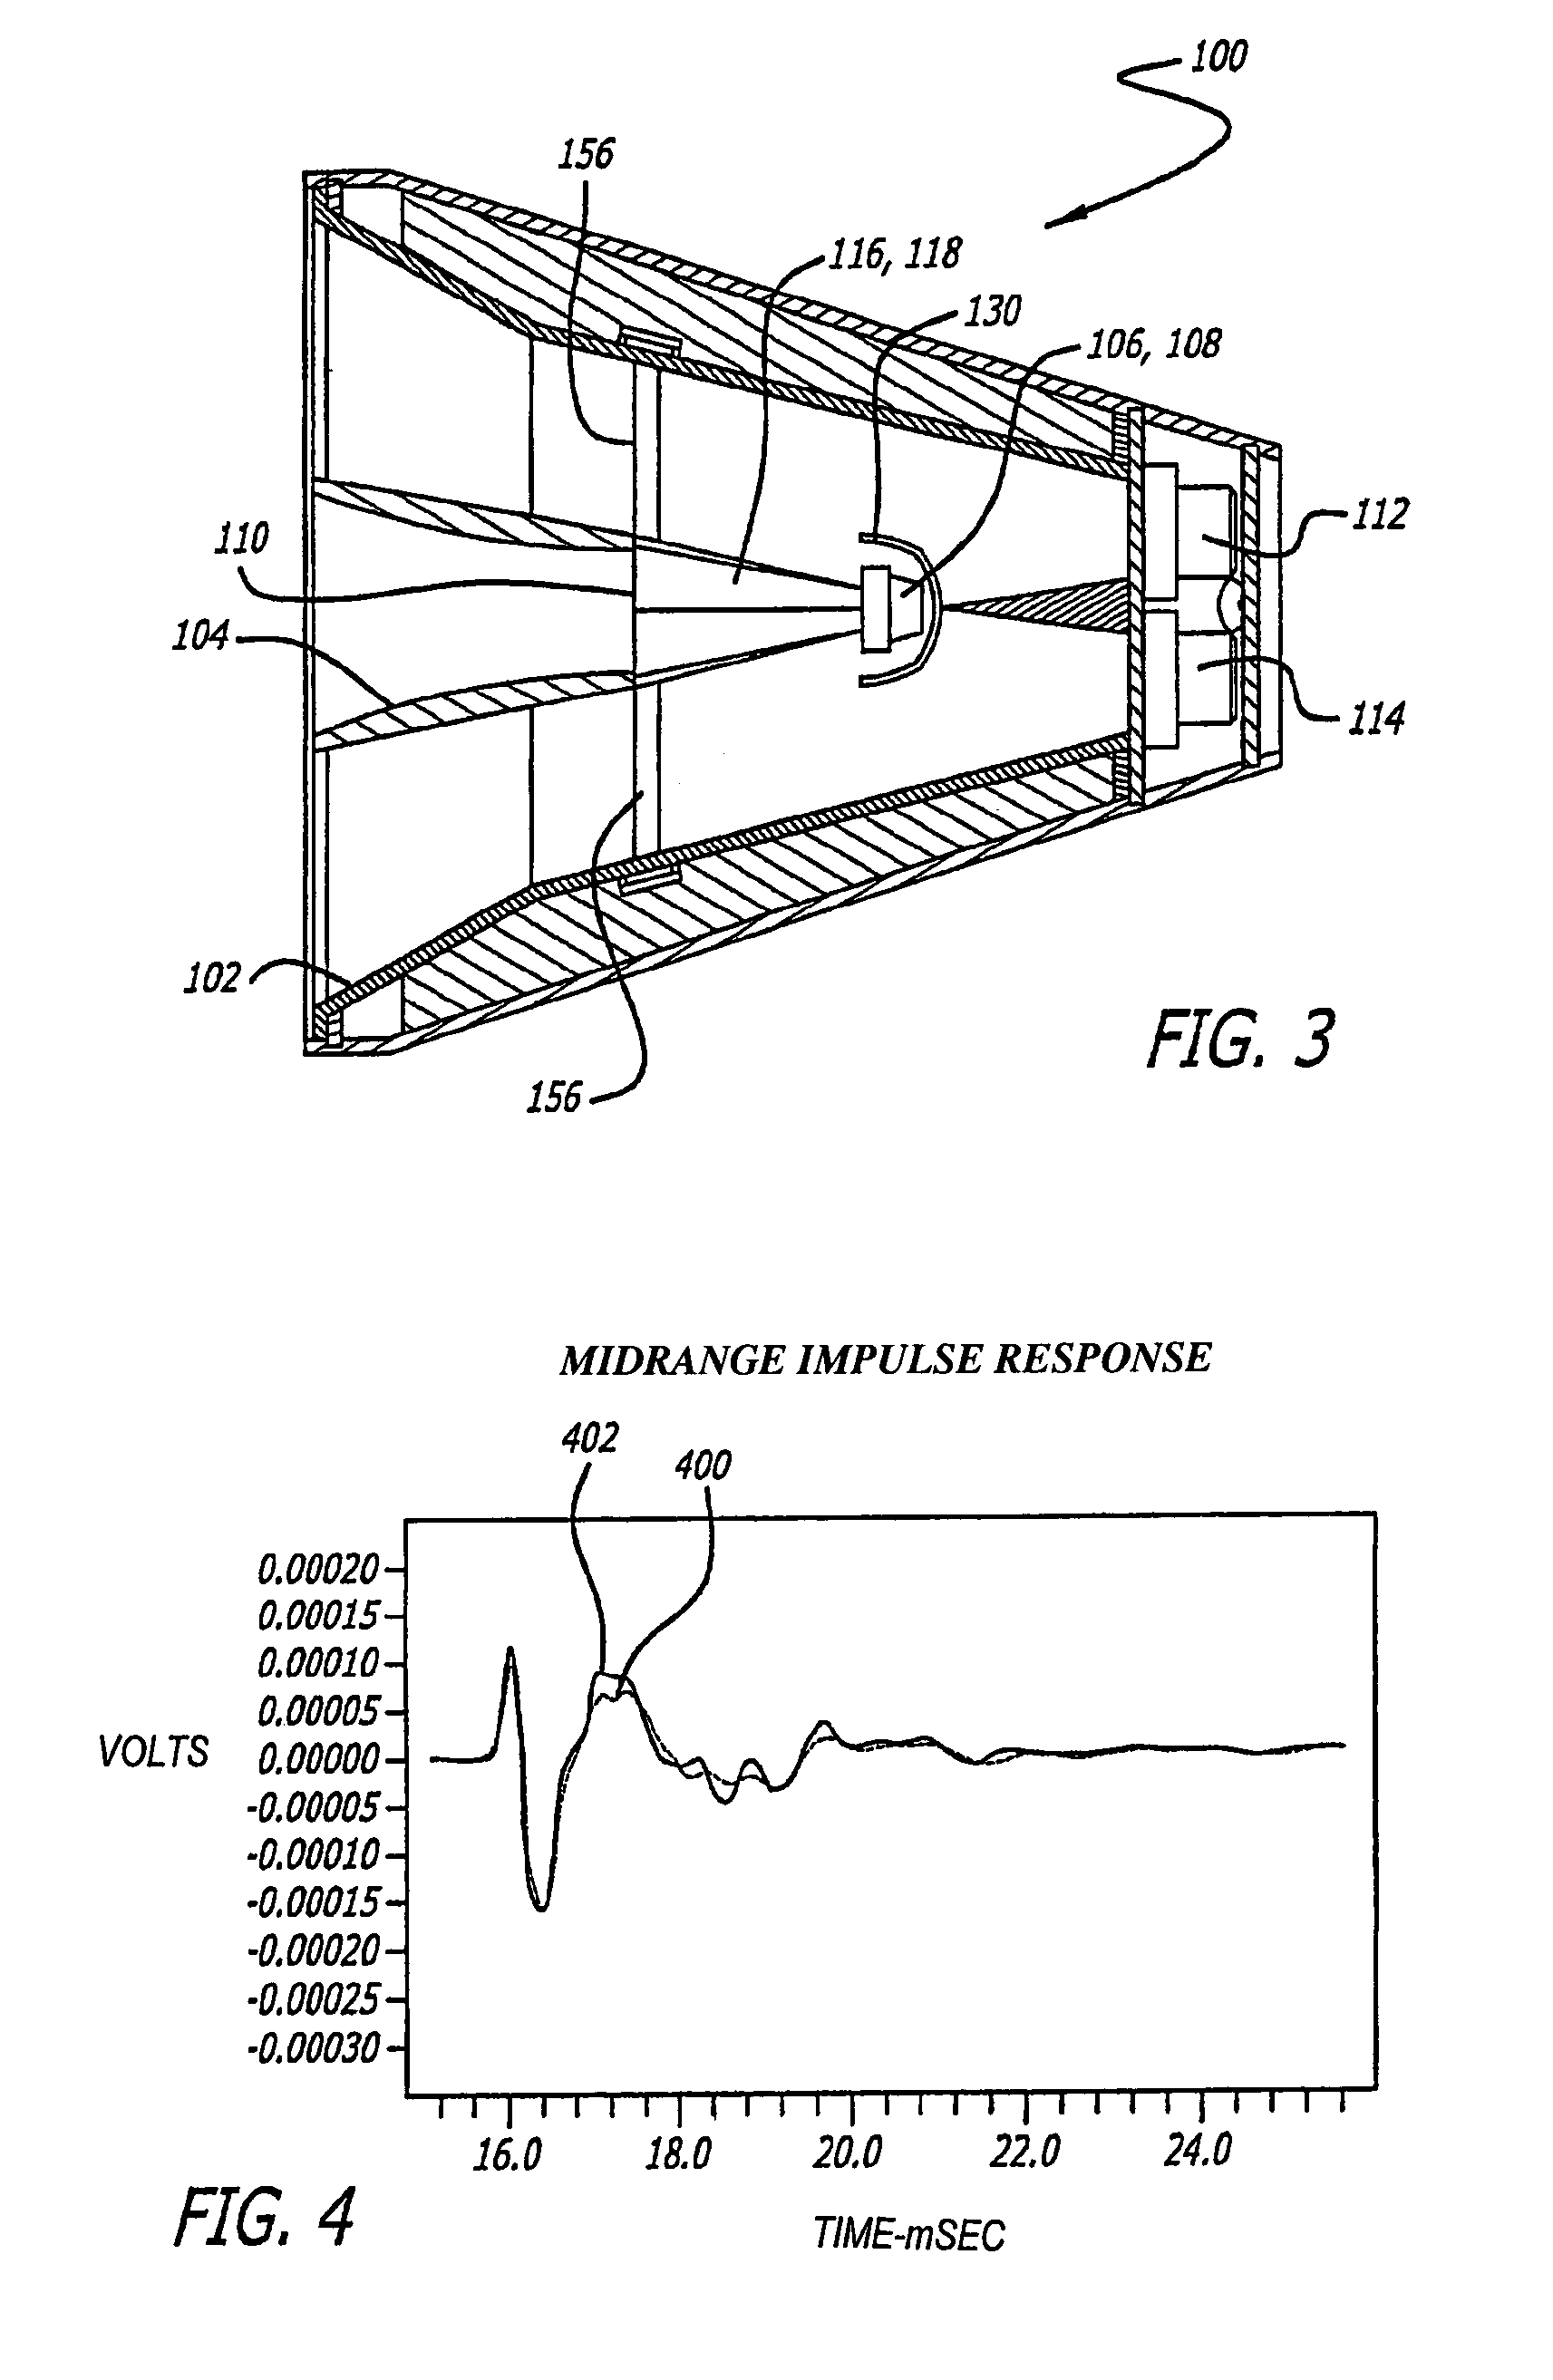 Sound system having a HF horn coaxially aligned in the mouth of a midrange horn